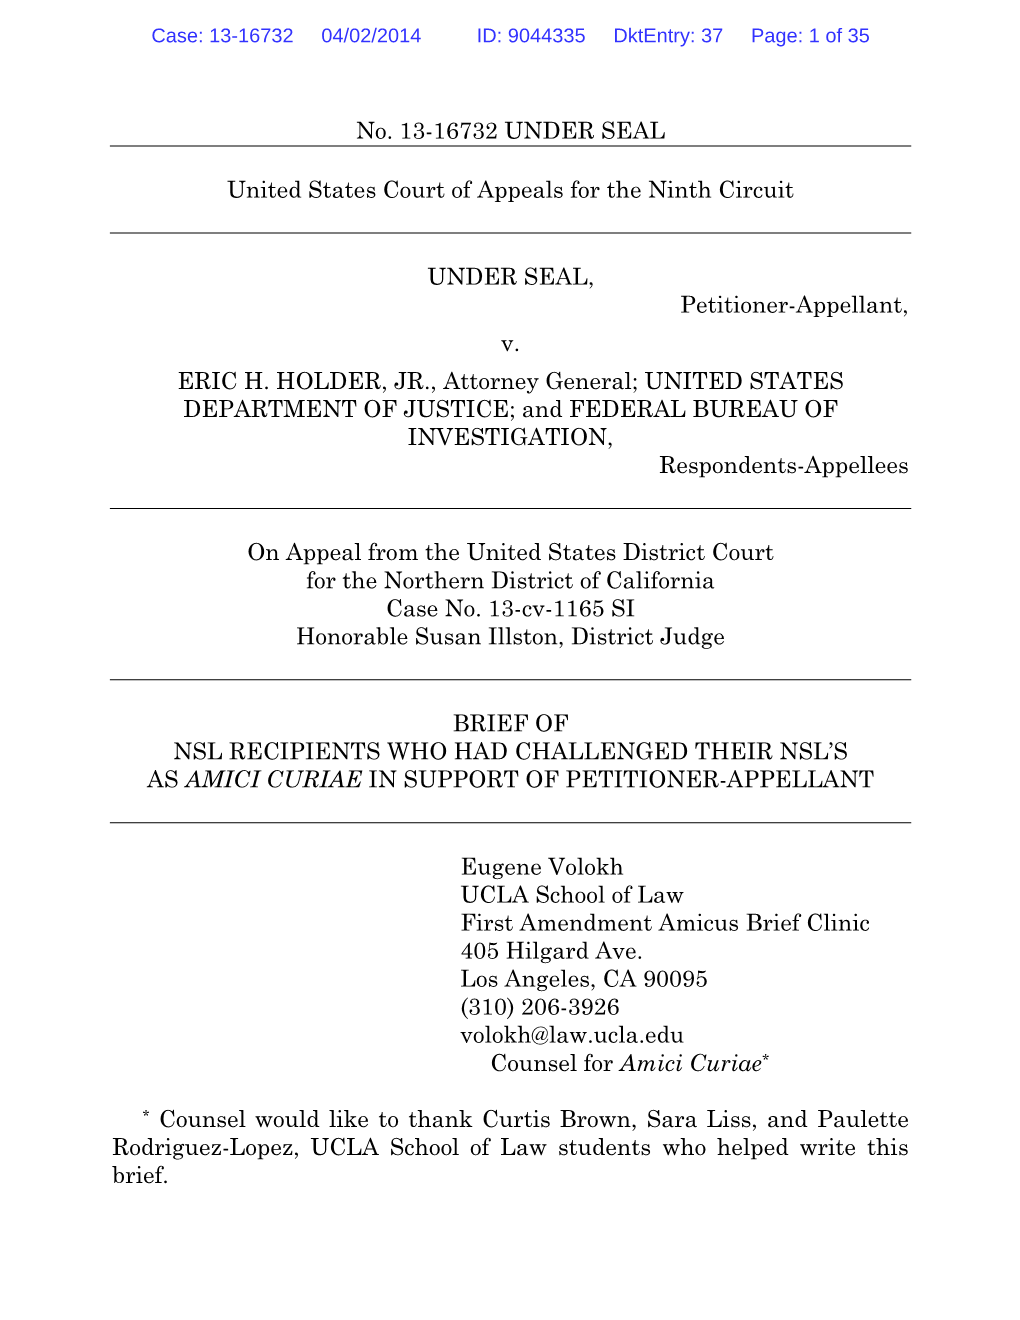 No. 13-16732 UNDER SEAL United States Court of Appeals for The